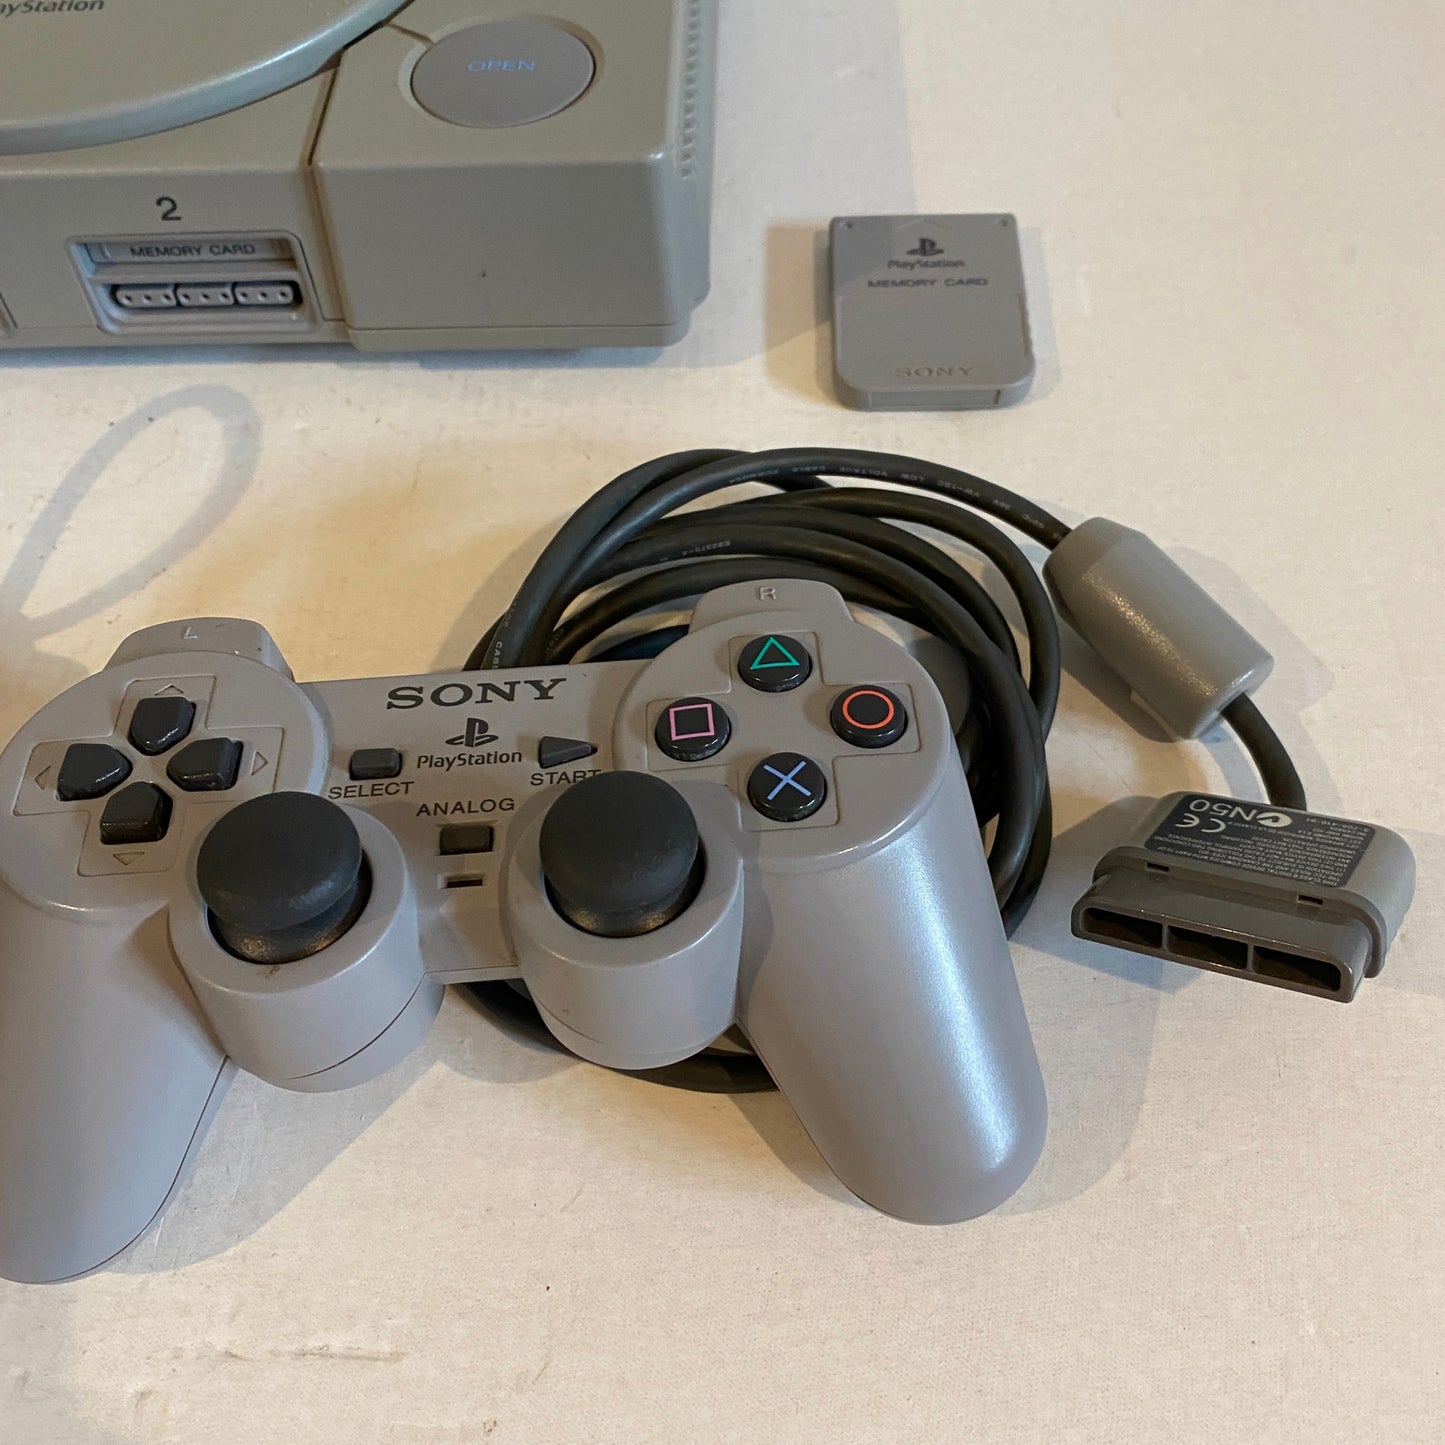 Sony Playstation PS1 - SCPH-7501